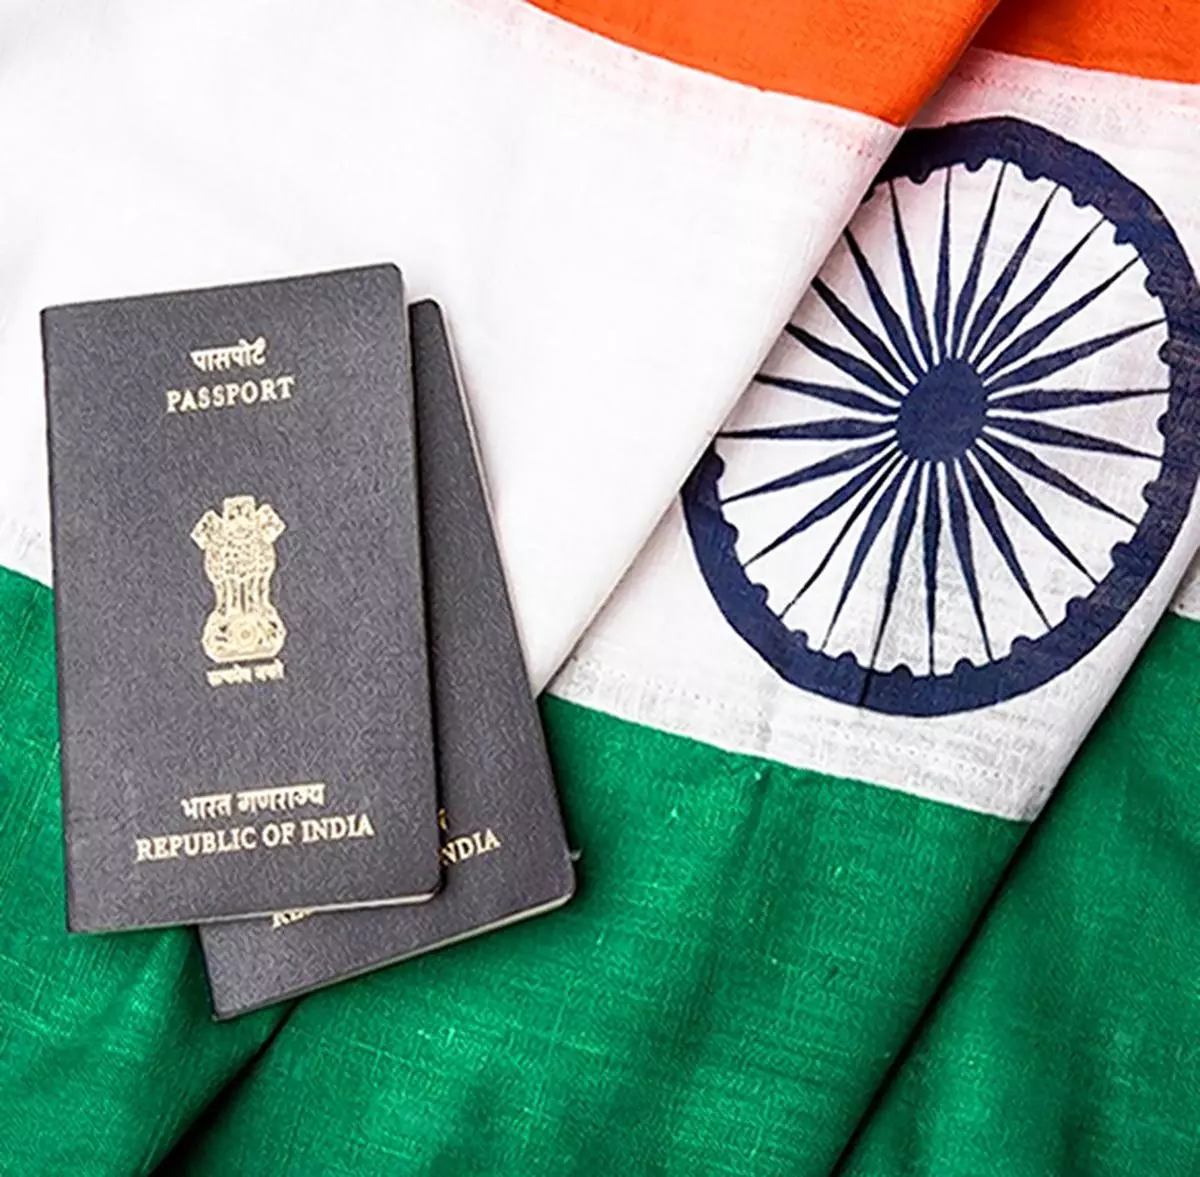 indian passport and authentic indian tricolour flag made up of khadi or pure cotton material